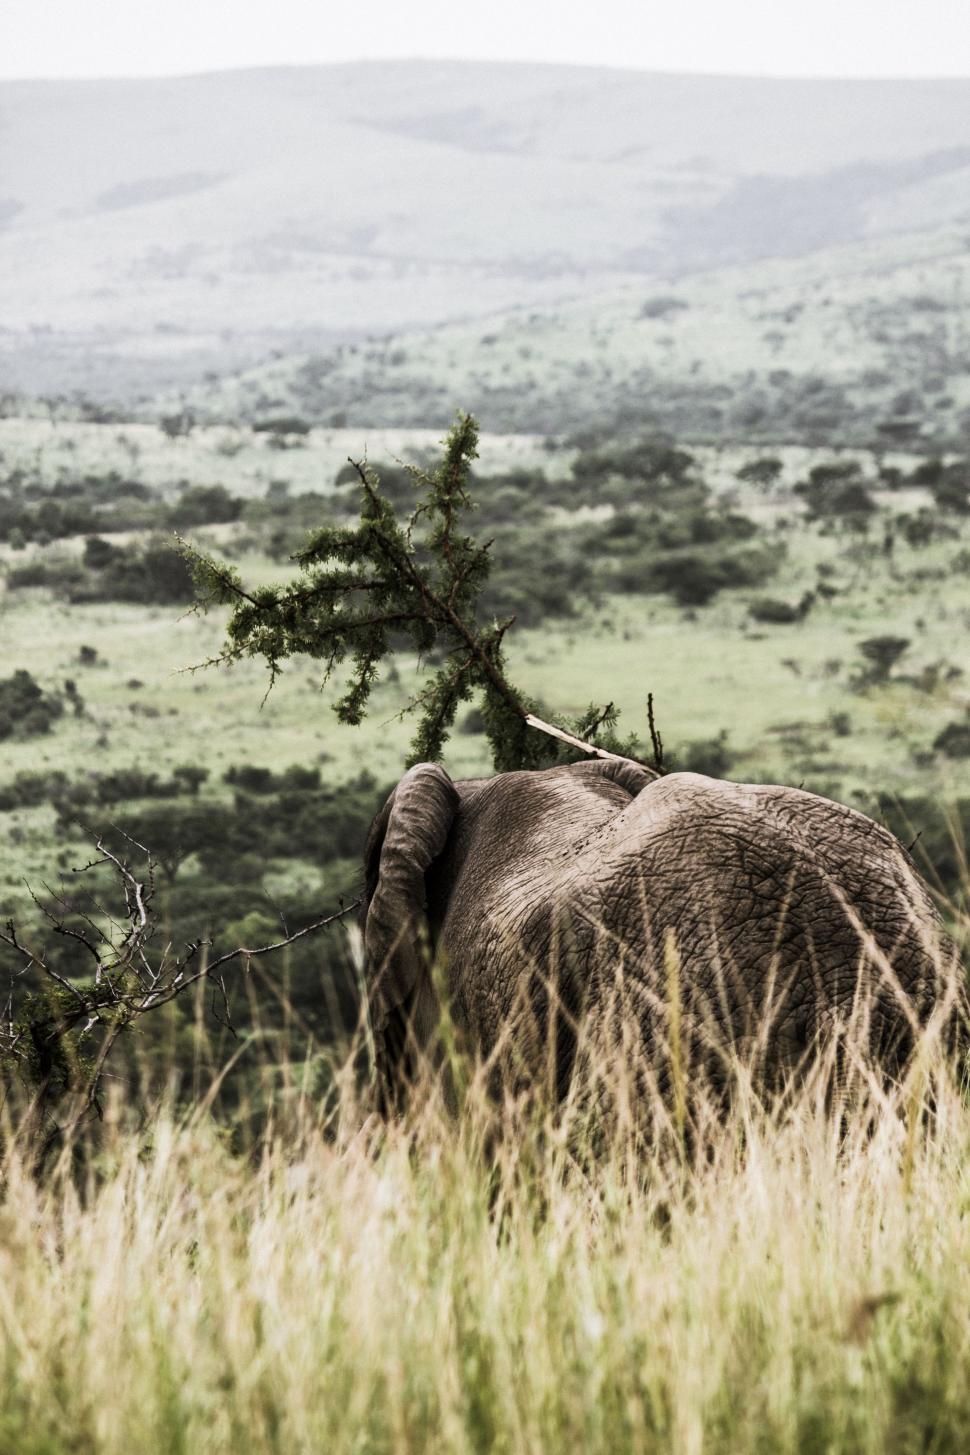 Free Image of Elephant Standing in Field With Tree Trunk 